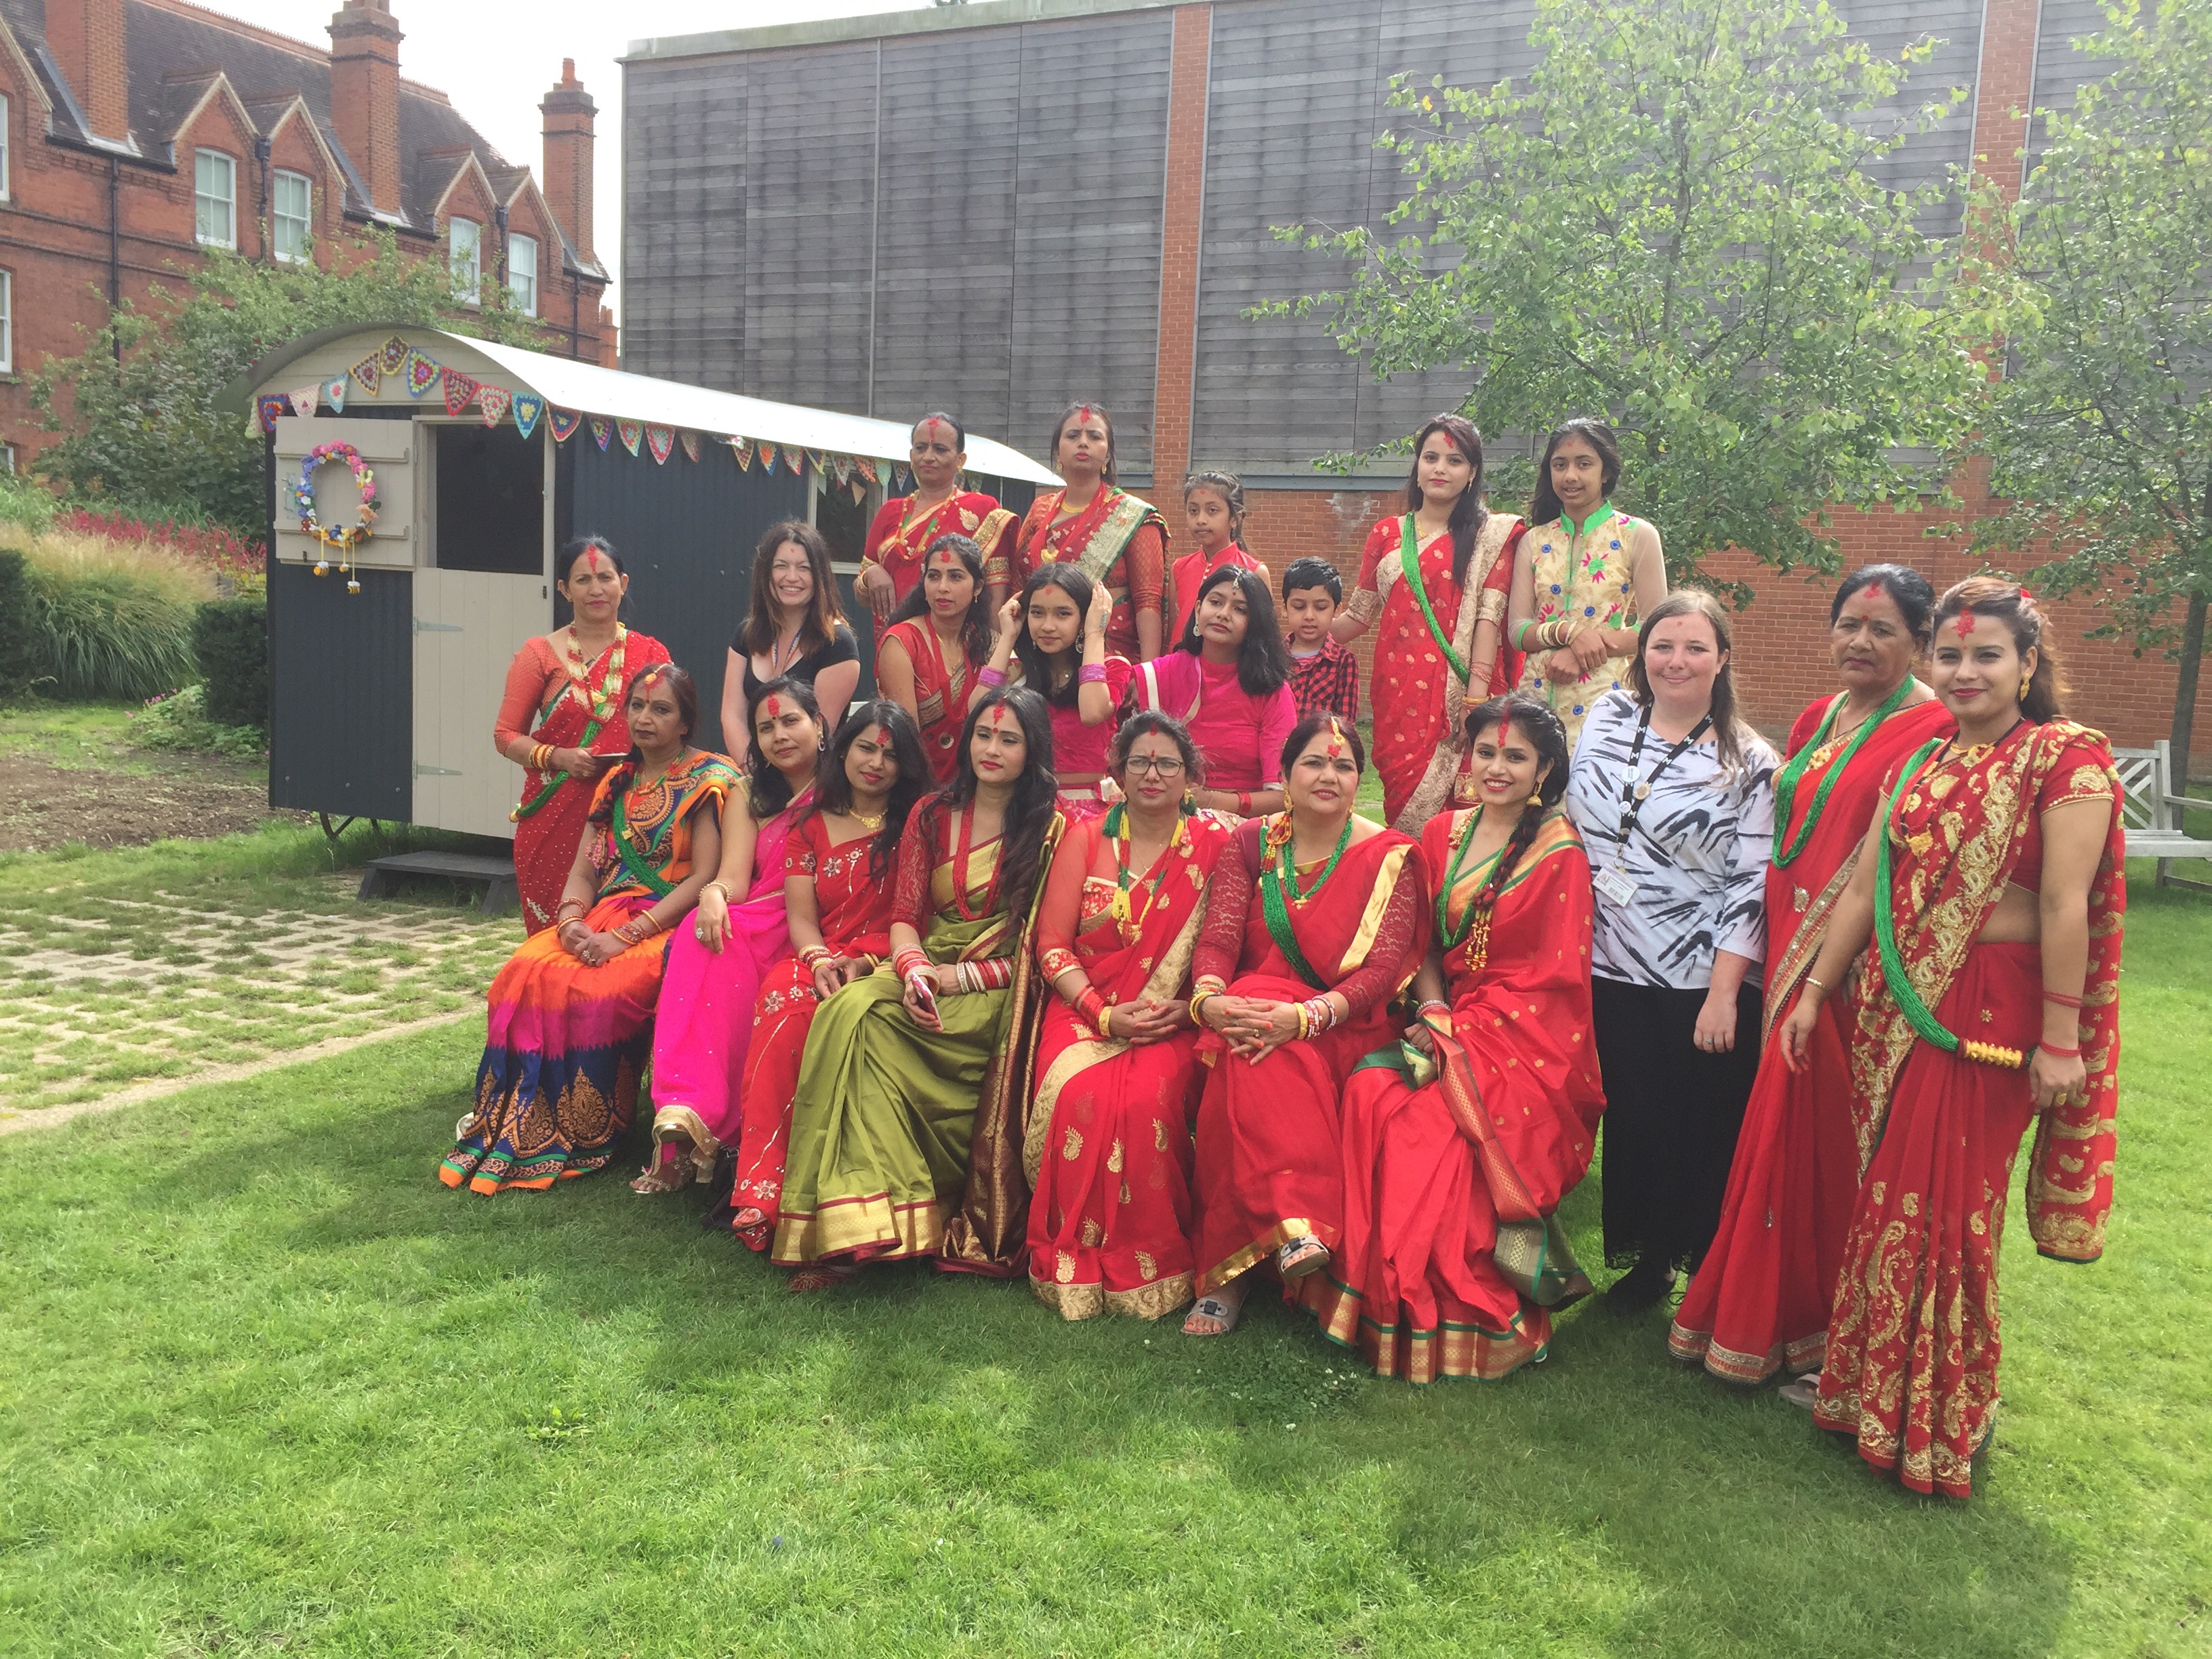 Teej Pujaa Women’s Festival with MERL staff and members of the IRDC in the MERL garden